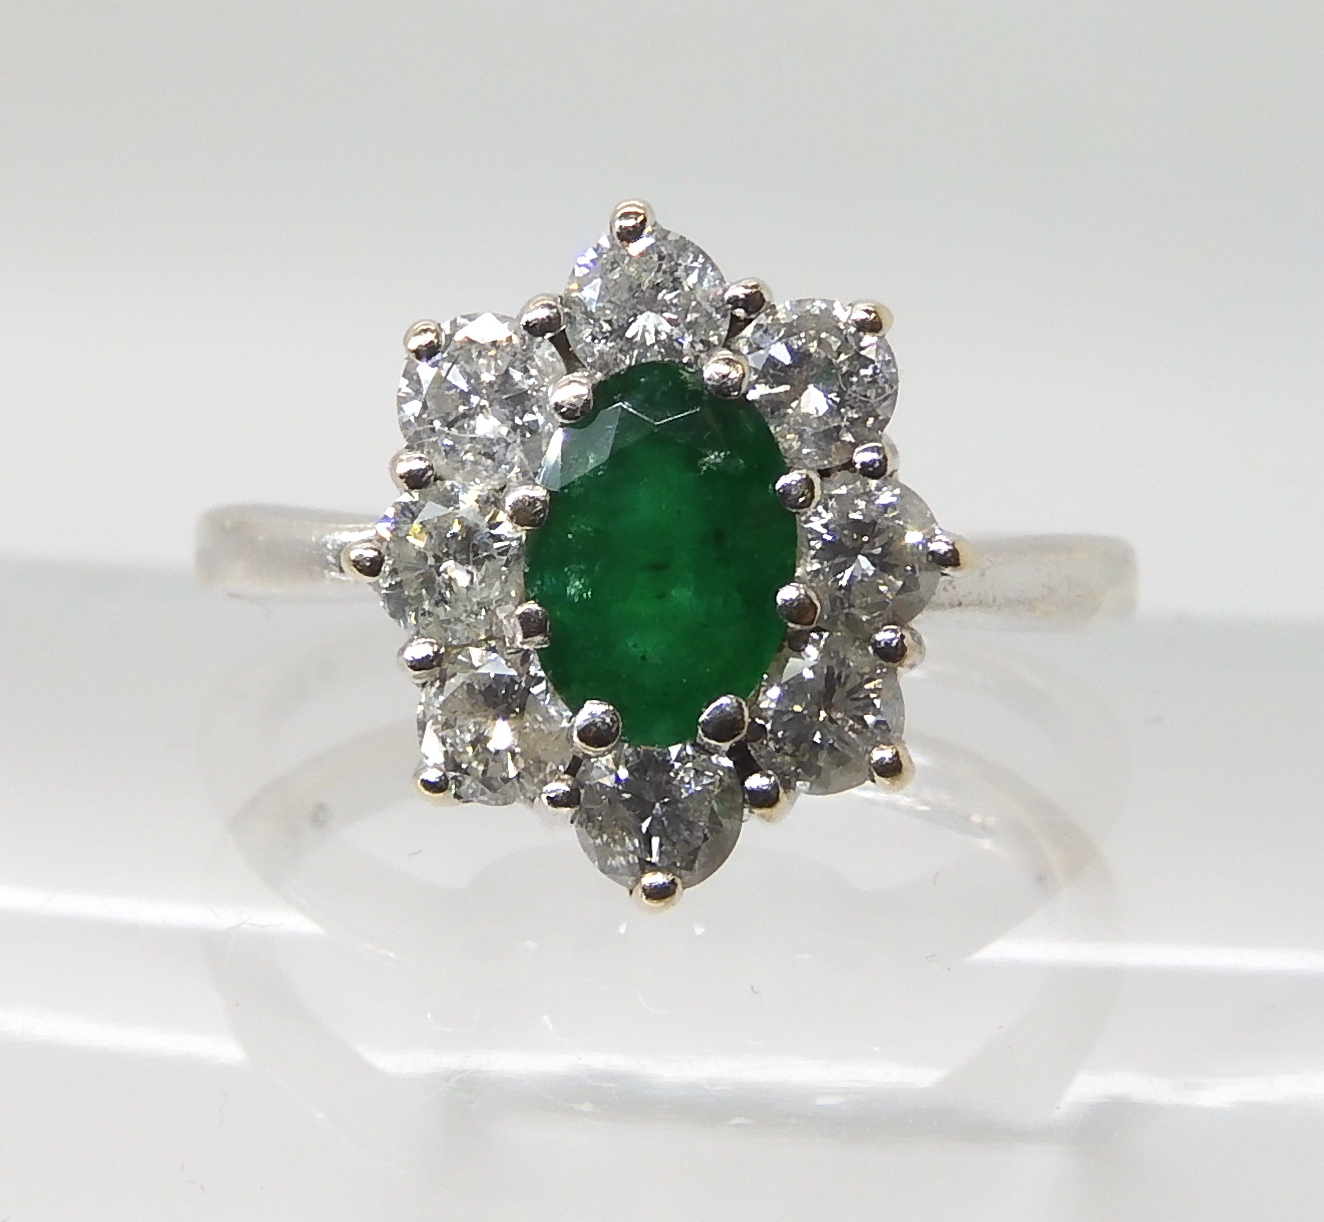 A 9CT WHITE GOLD EMERALD AND DIAMOND CLUSTER RING set with an oval emerald of approx 7mm x 5mm x 3.